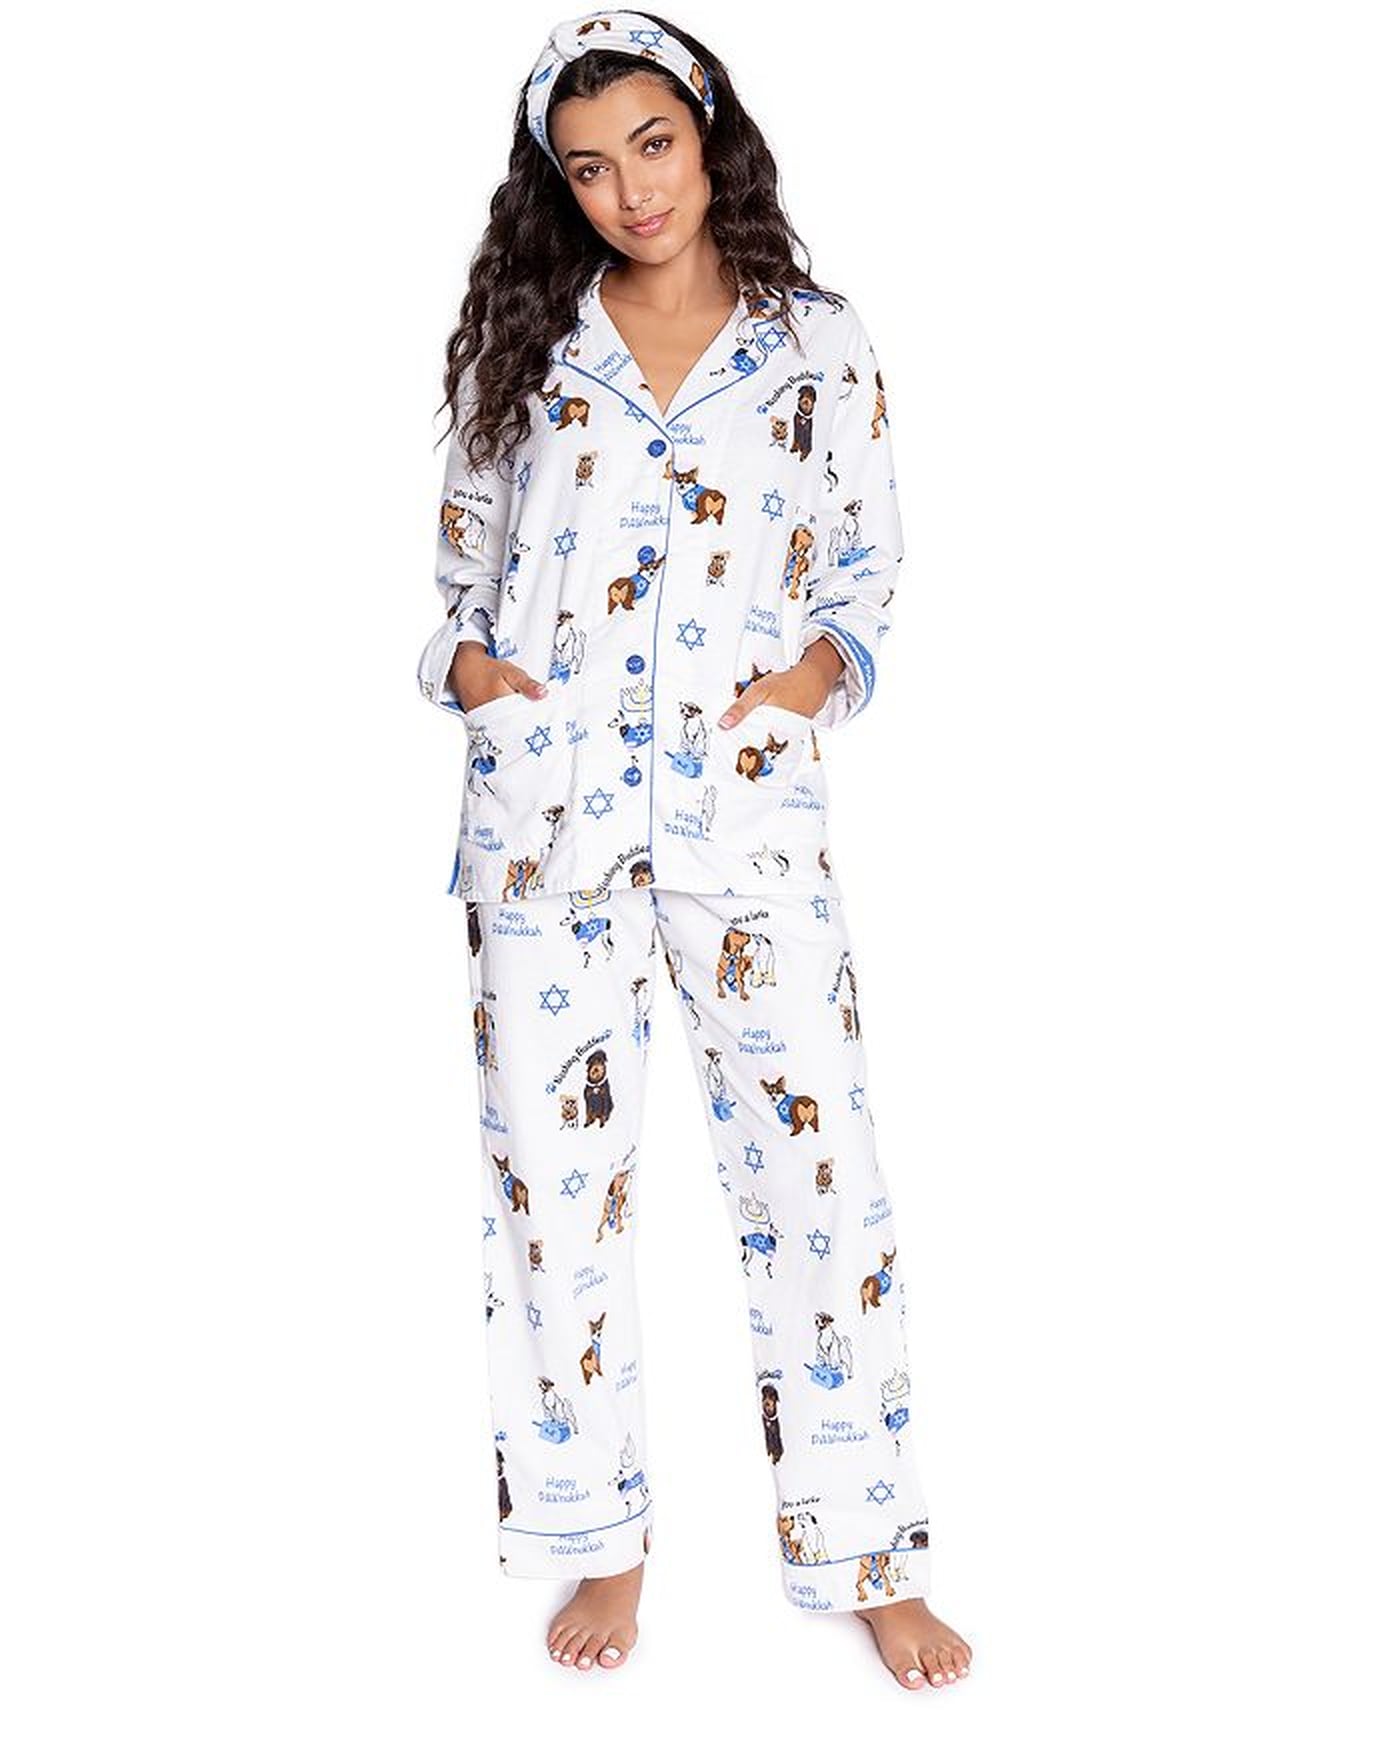 The Best Holiday Pajamas For Women | POPSUGAR Fashion